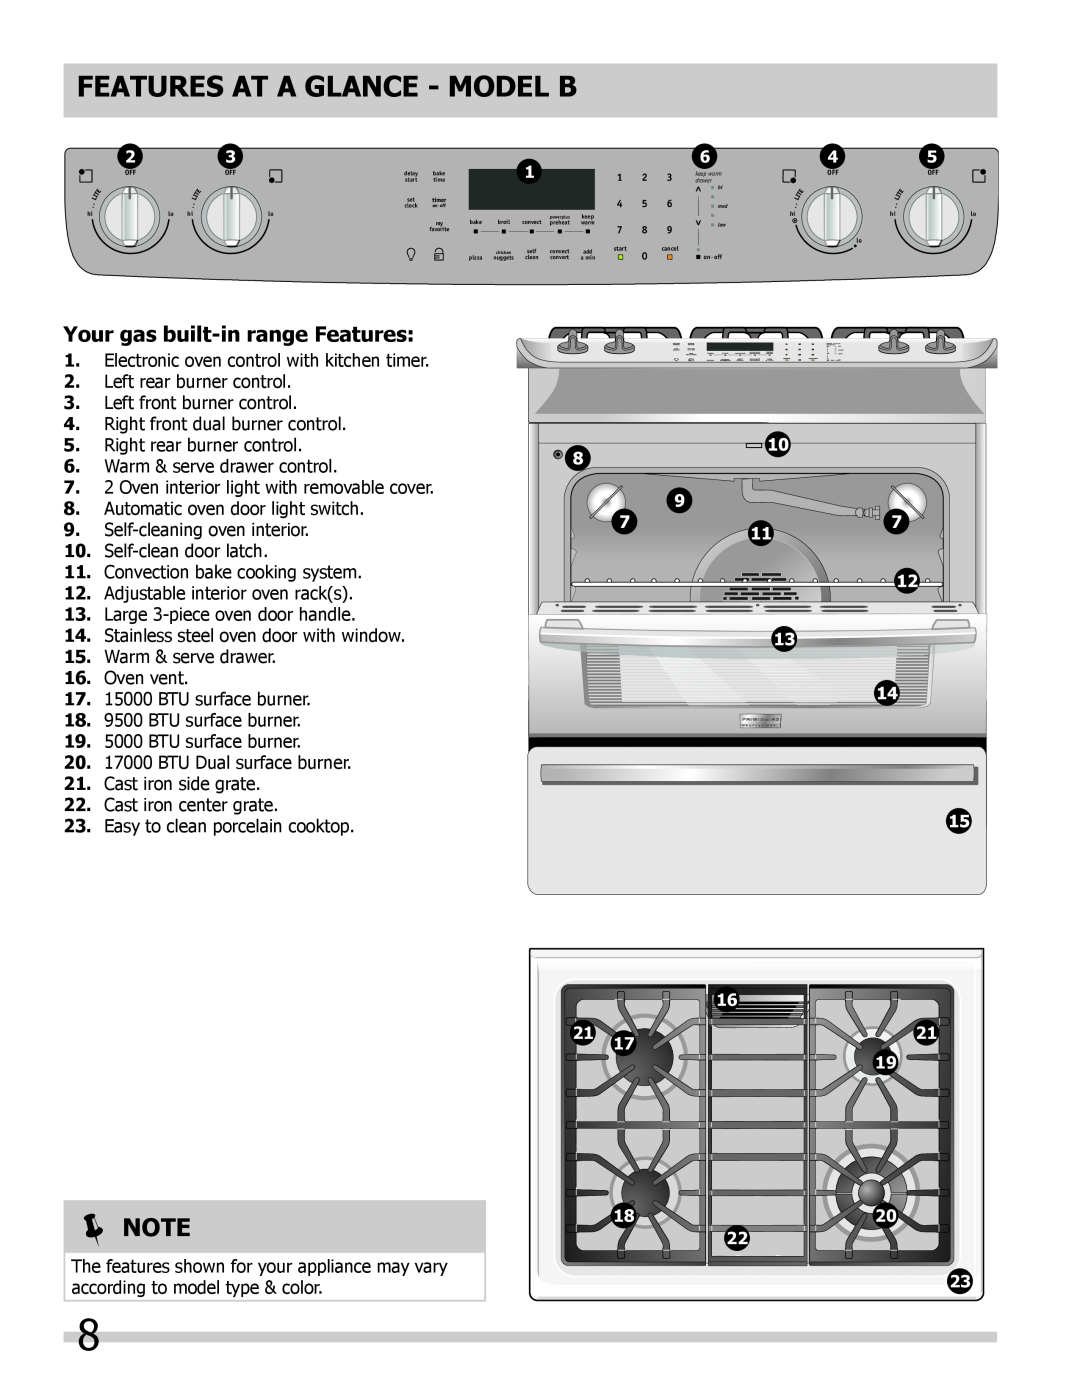 Frigidaire FGGS3065KF, FPGS3085KF Features At A Glance - Model B, 09-025-F, Note, Your gas built-inrange Features, 1820 